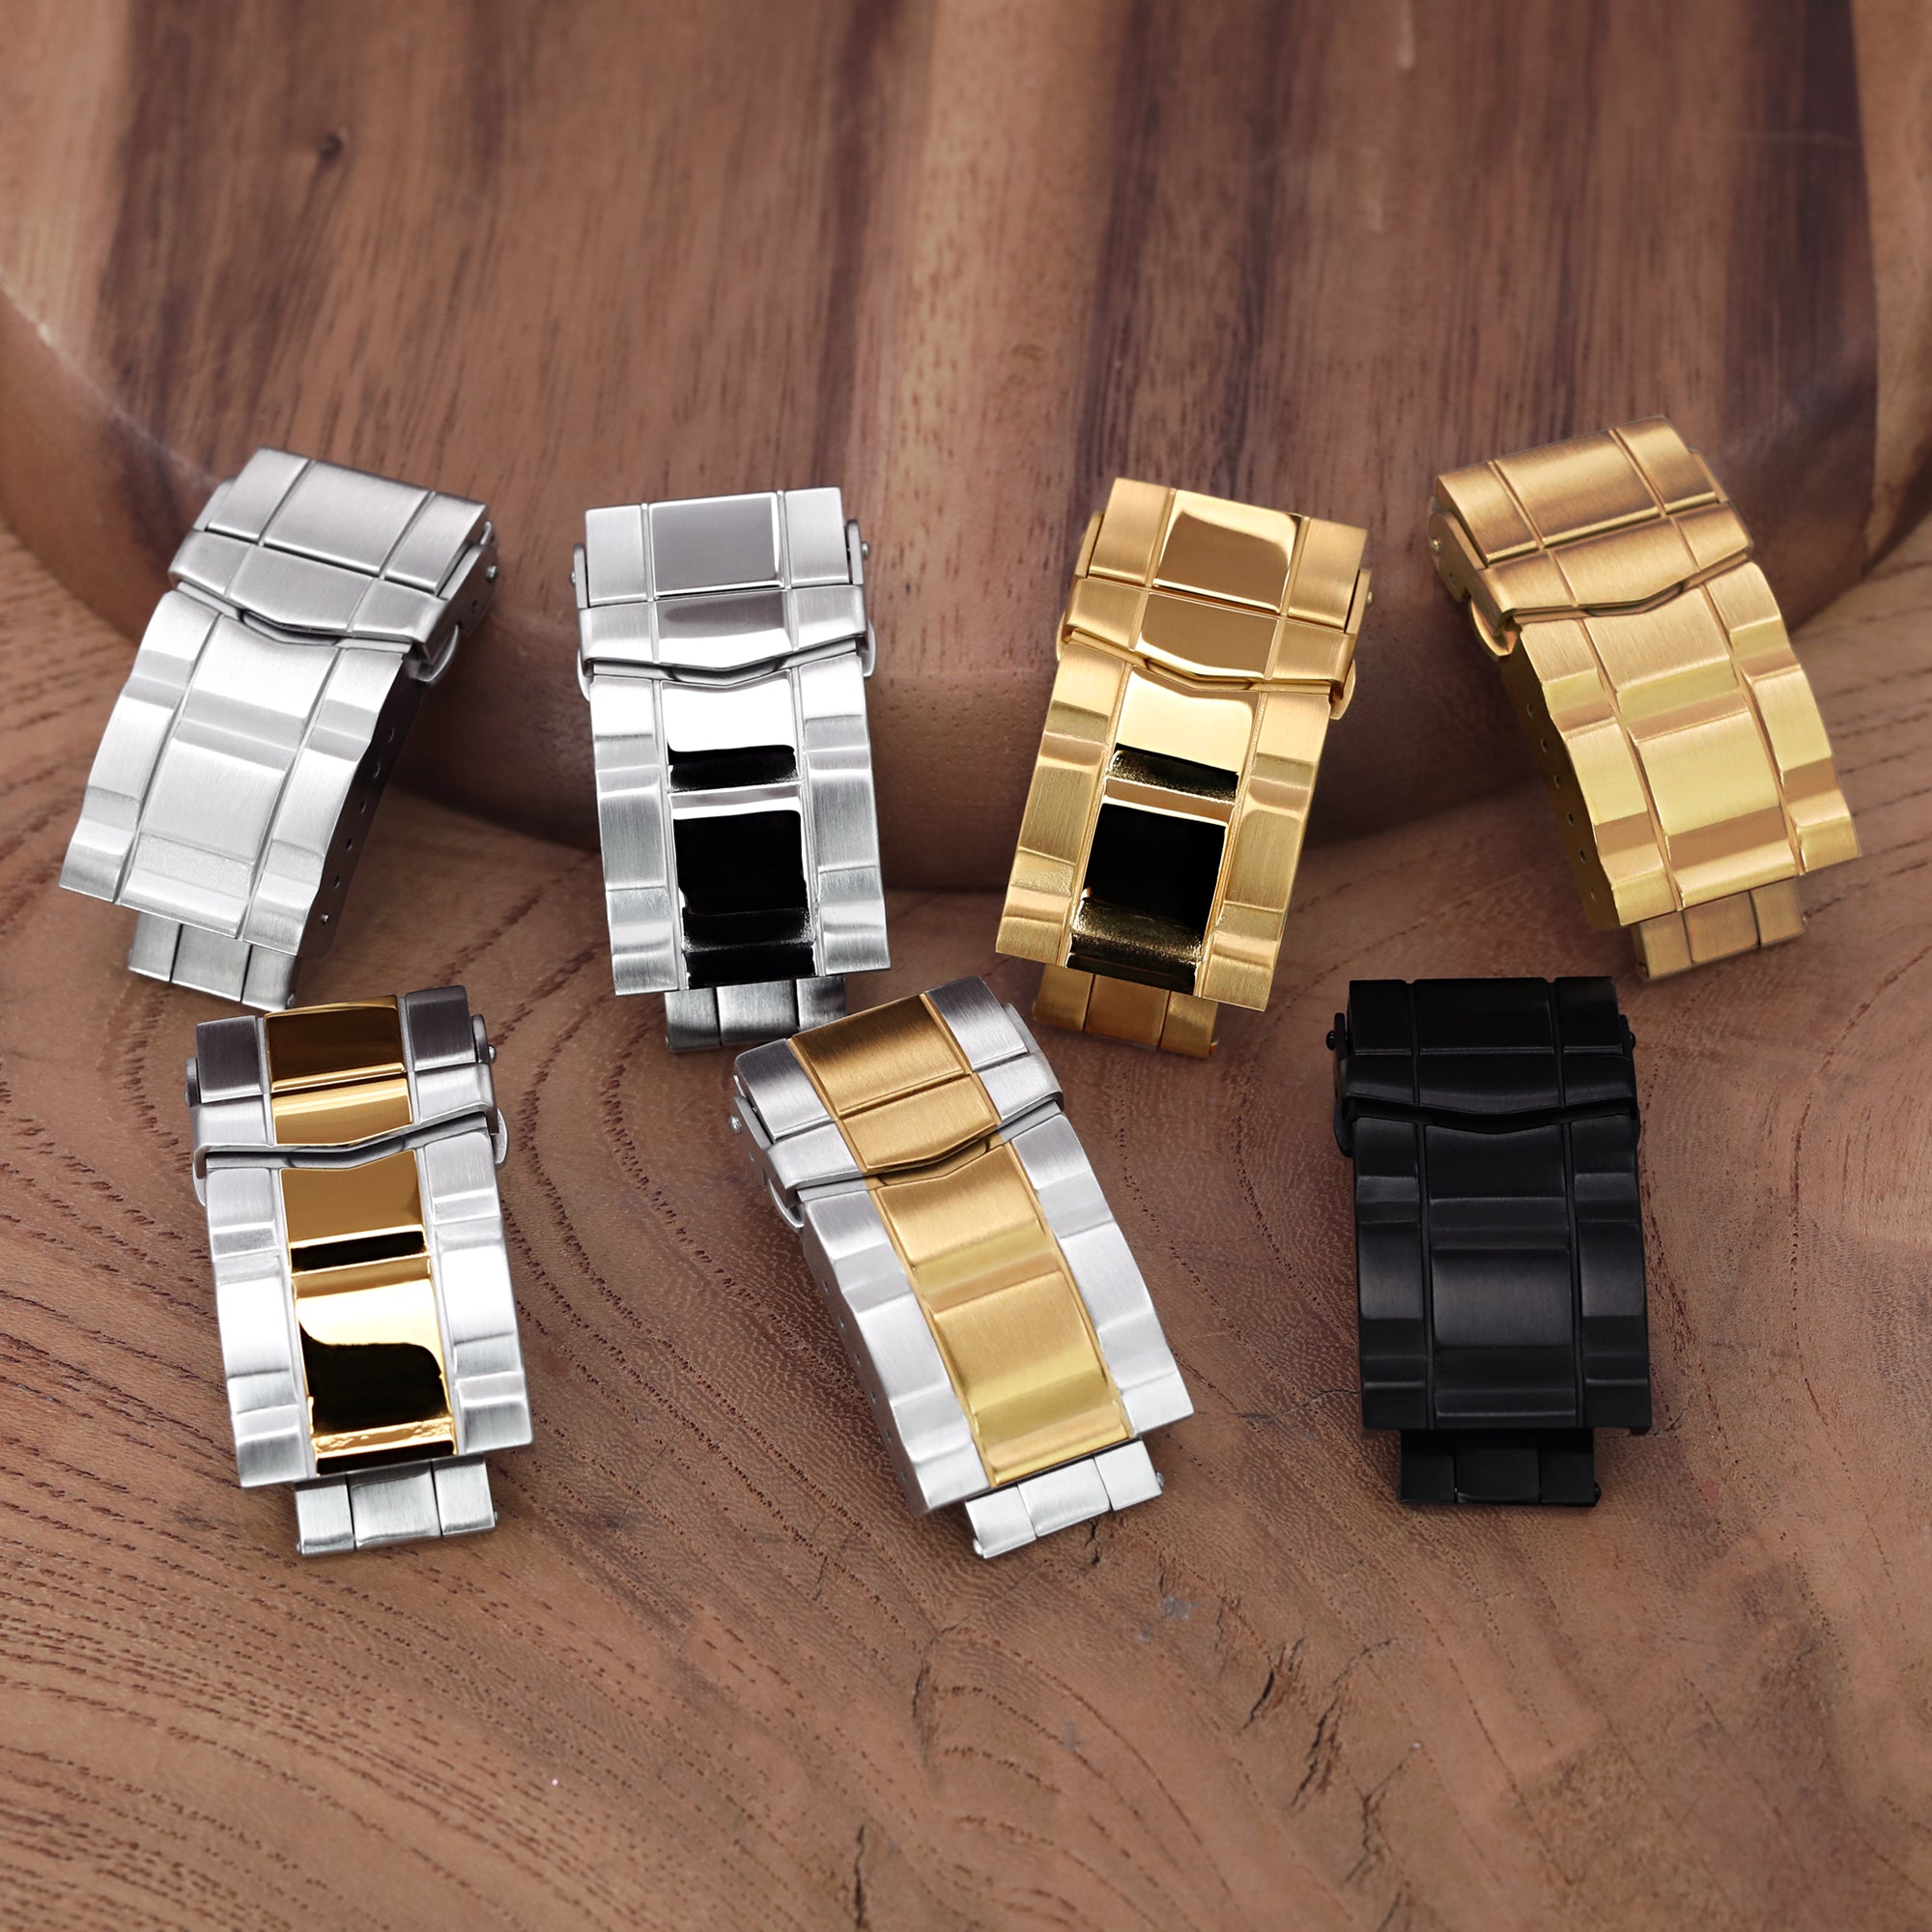 18mm Solid 316L Stainless Steel Double Locks SUB Diver Clasp Button Control 2-tone IP Brushed Gold Strapcode Buckles